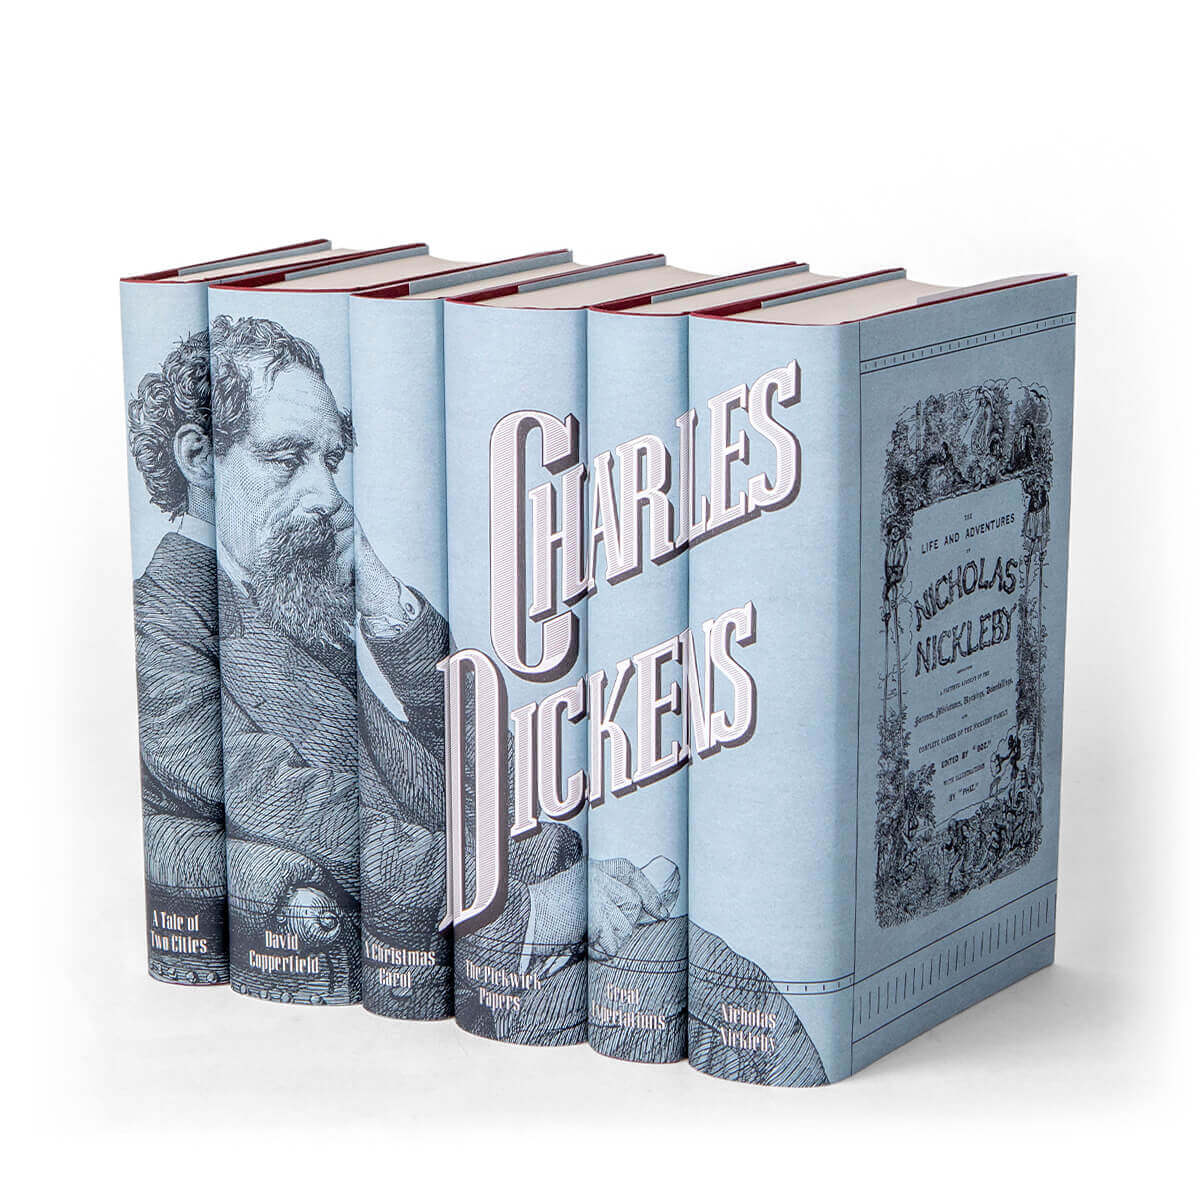 Our Charles Dickens set includes 6 masterpieces, including David Copperfield and Great Expectations. Each book is an heirloom quality hardcover edition published by Everyman's Library. We have wrapped the set in an original jacket design featuring a portrait of Dickens, classic 19th century typography, and a unique blue that references the original first edition covers of Dickens' serial publications.